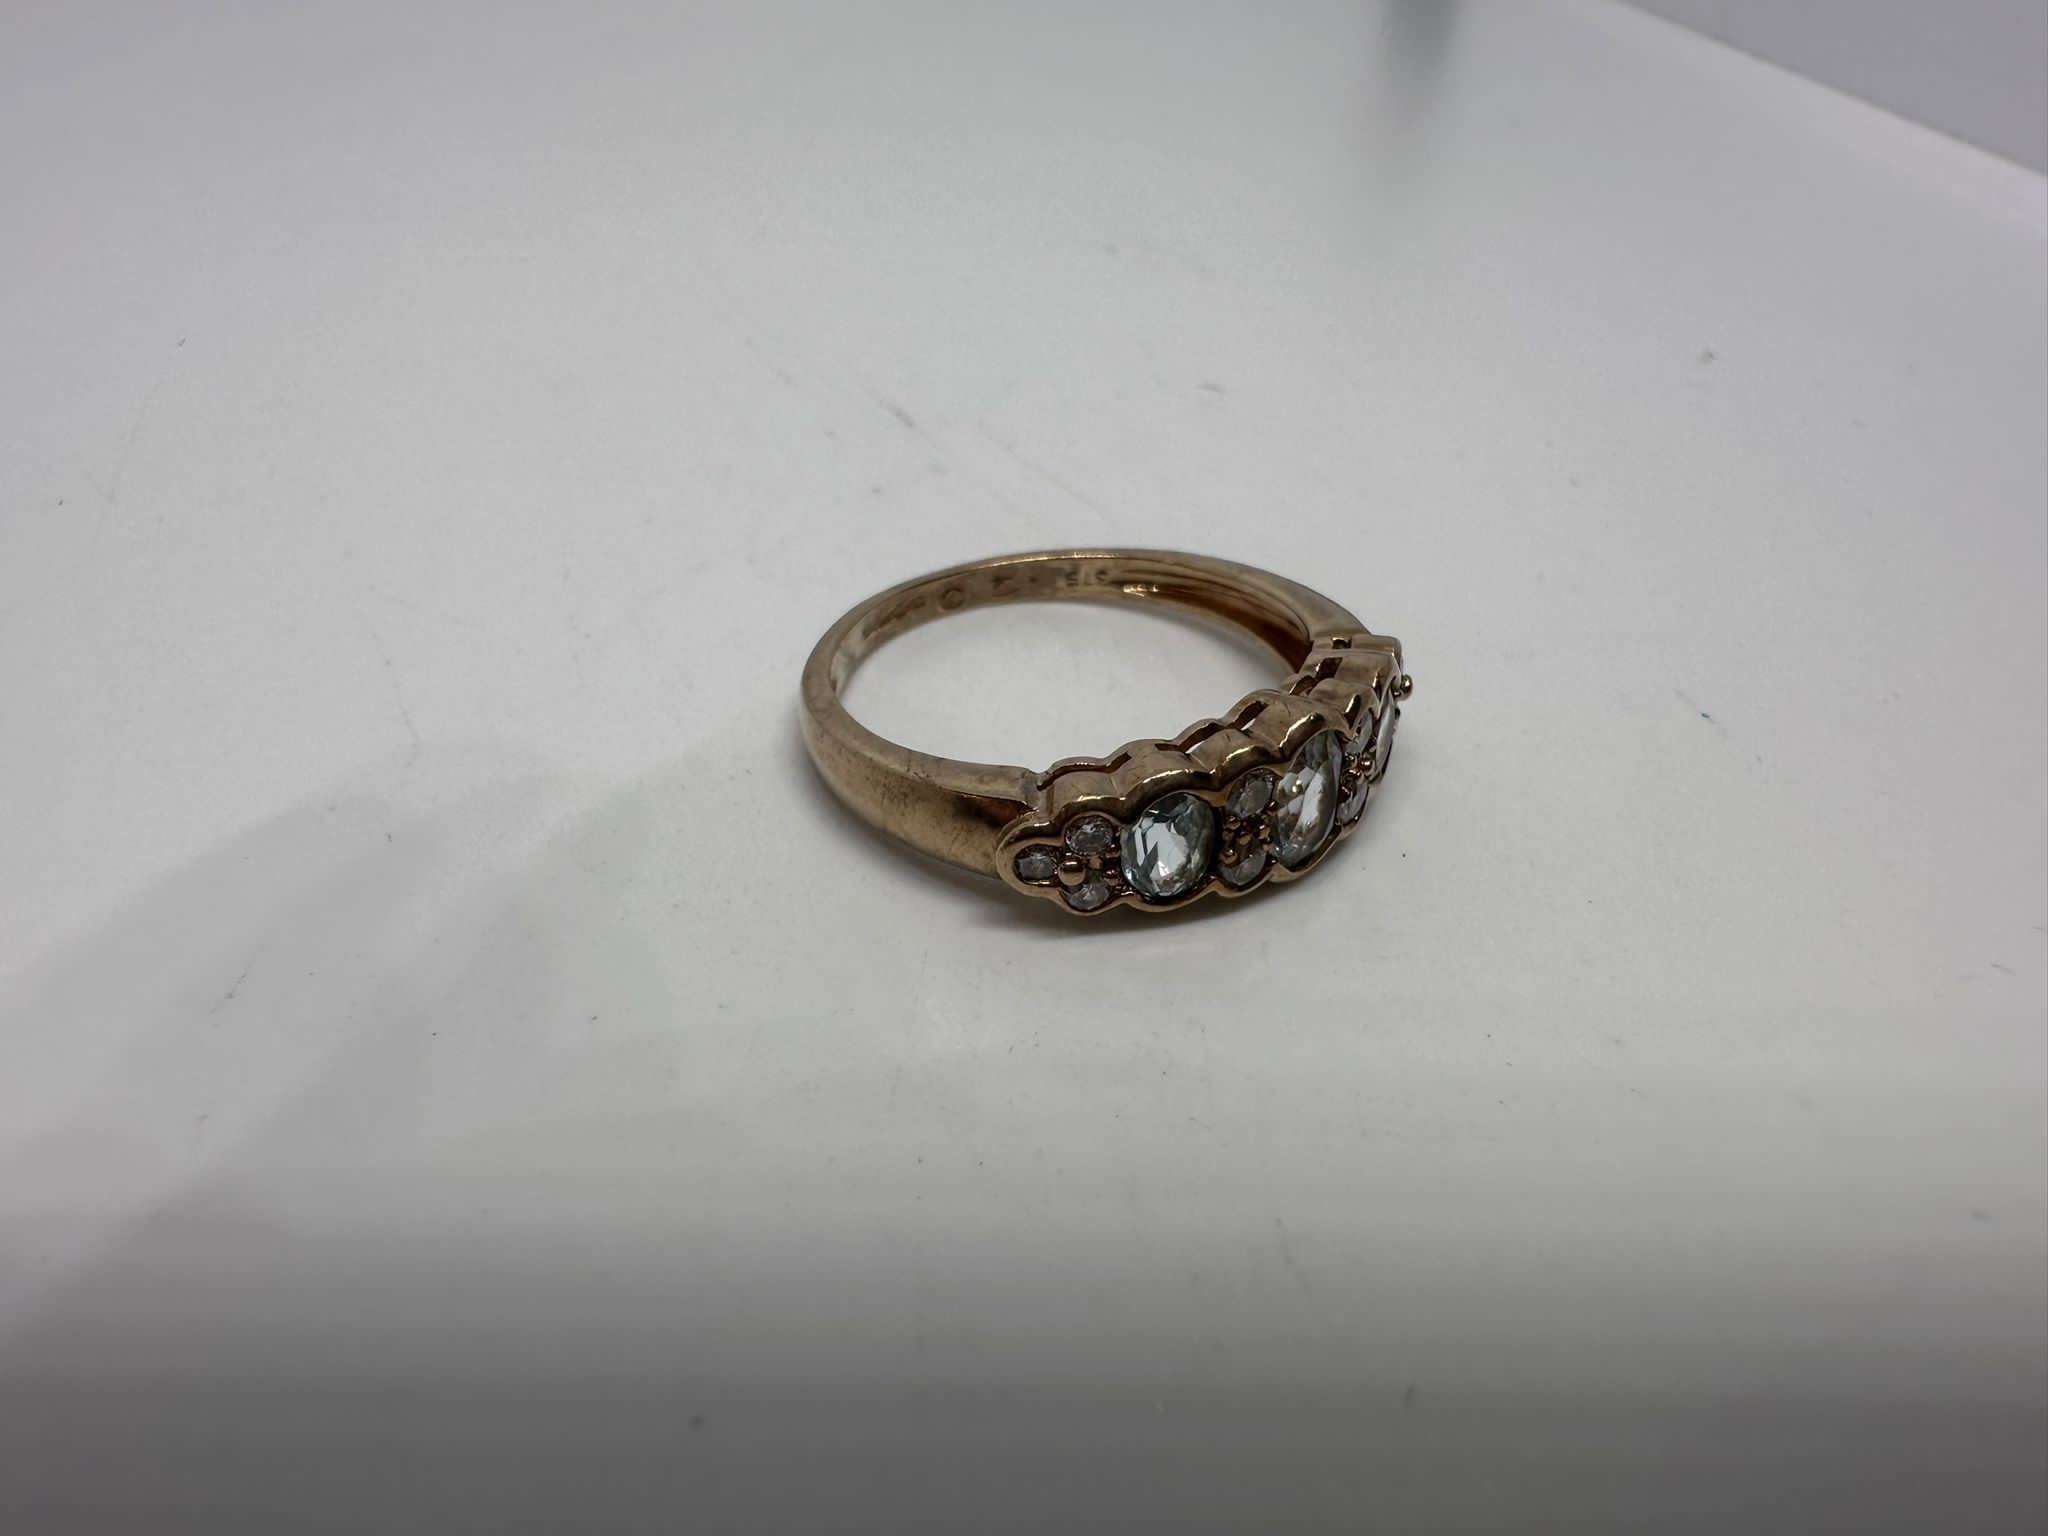 9ct gold blue topaz and diamond ring - Image 3 of 3